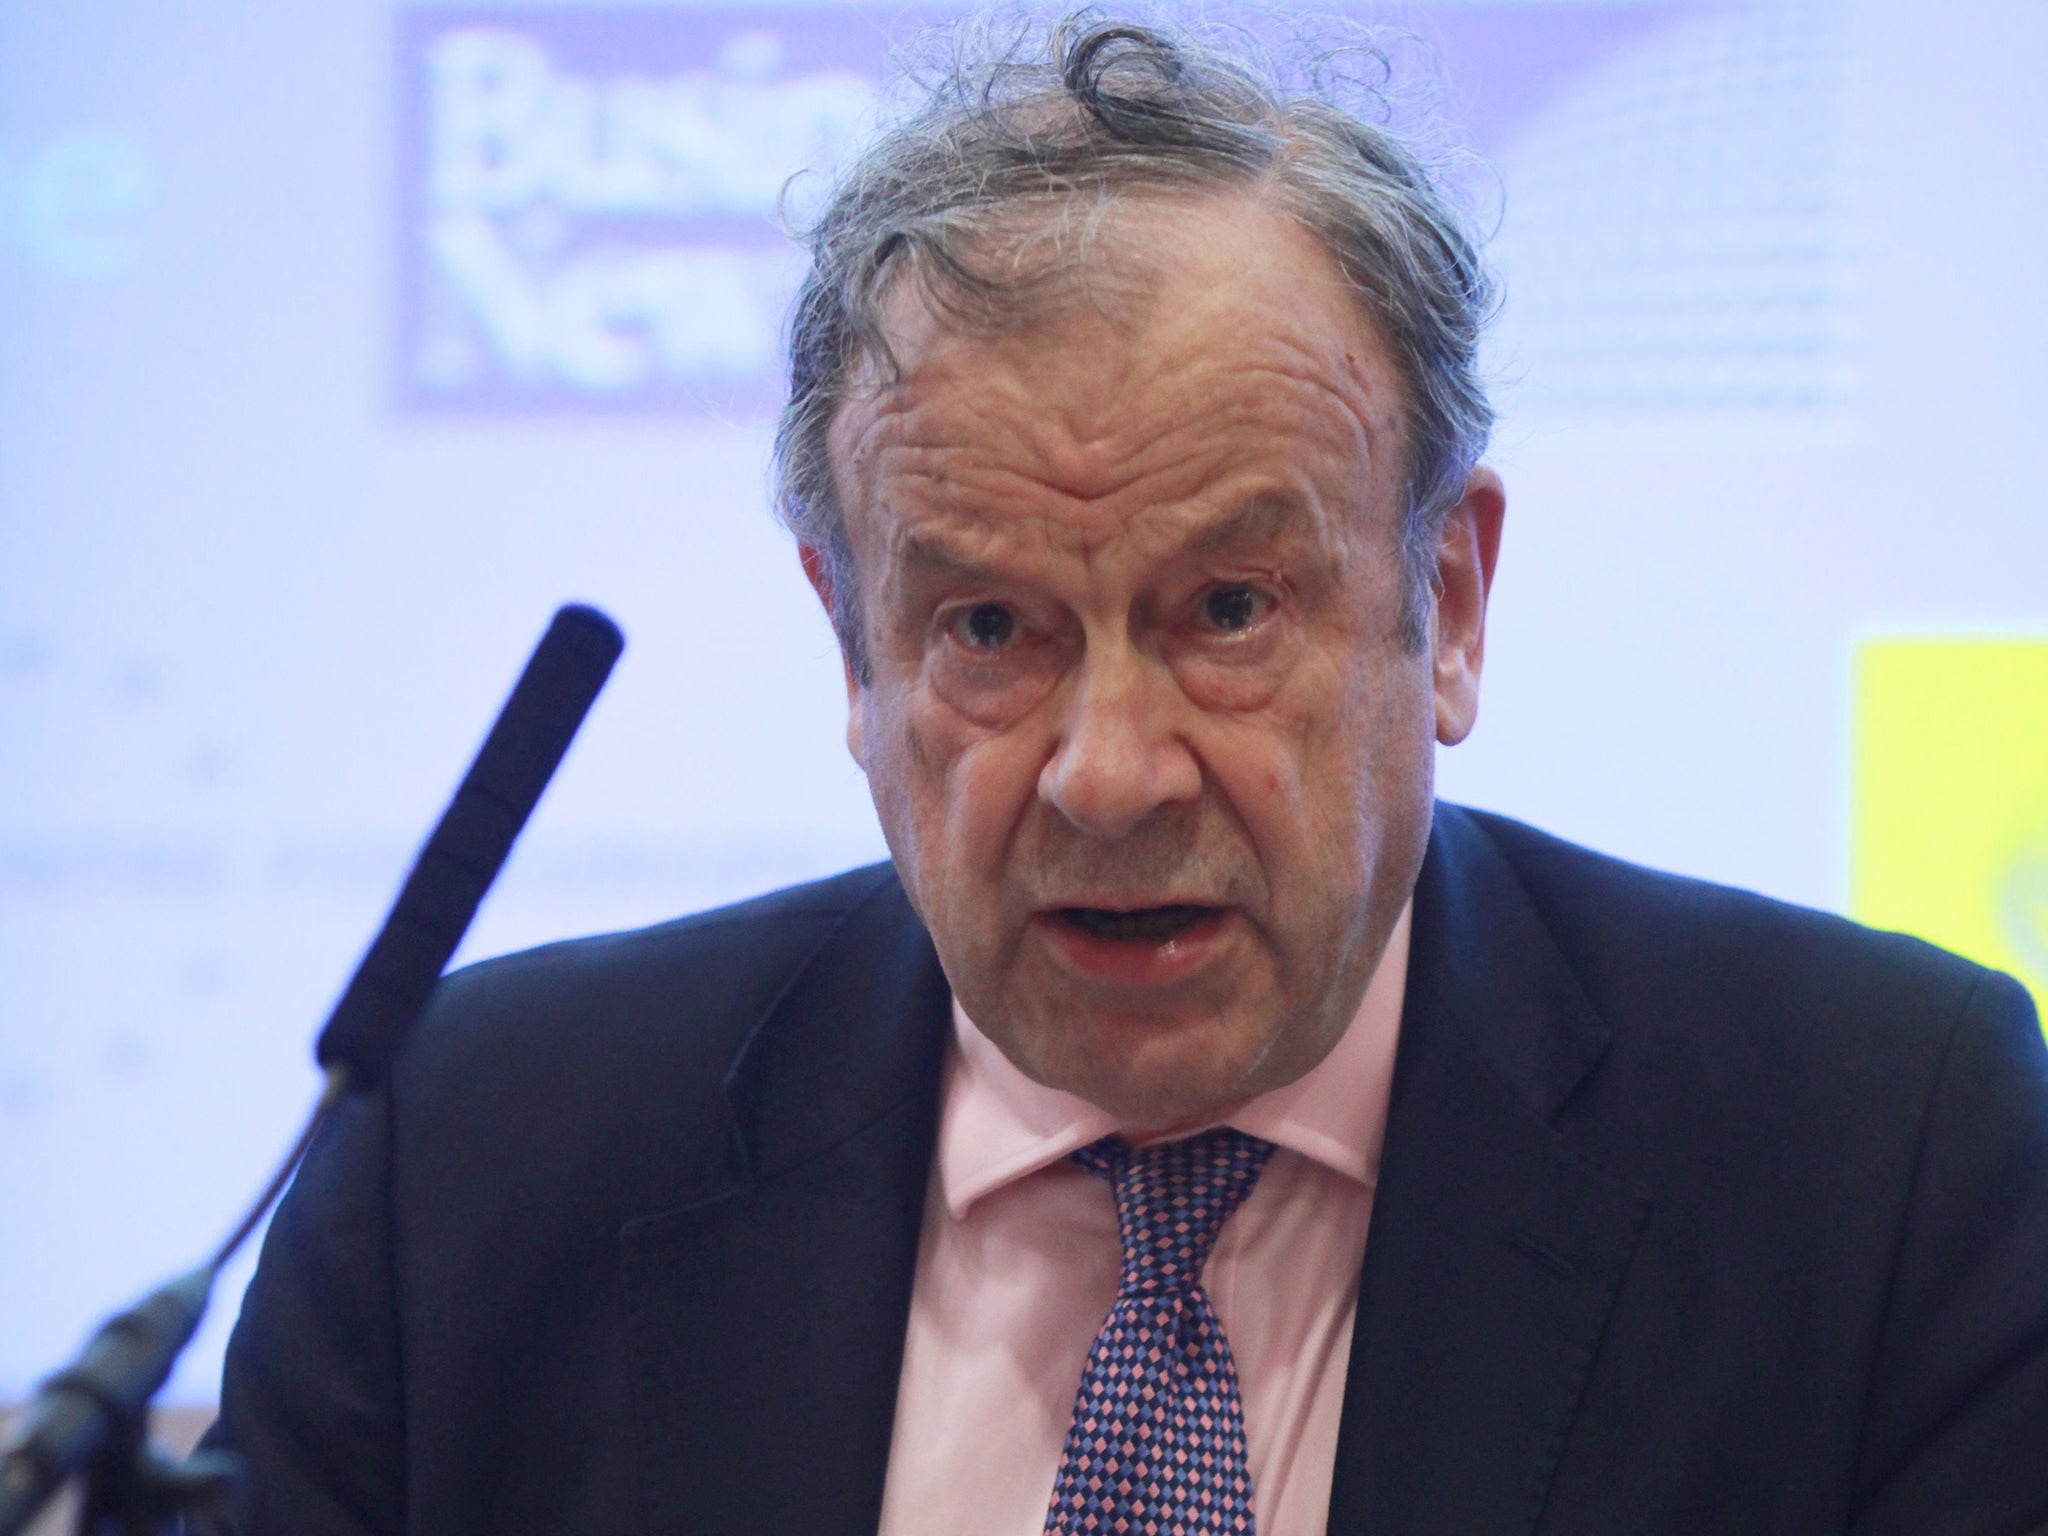 John Mills is Labour’s largest individual donor